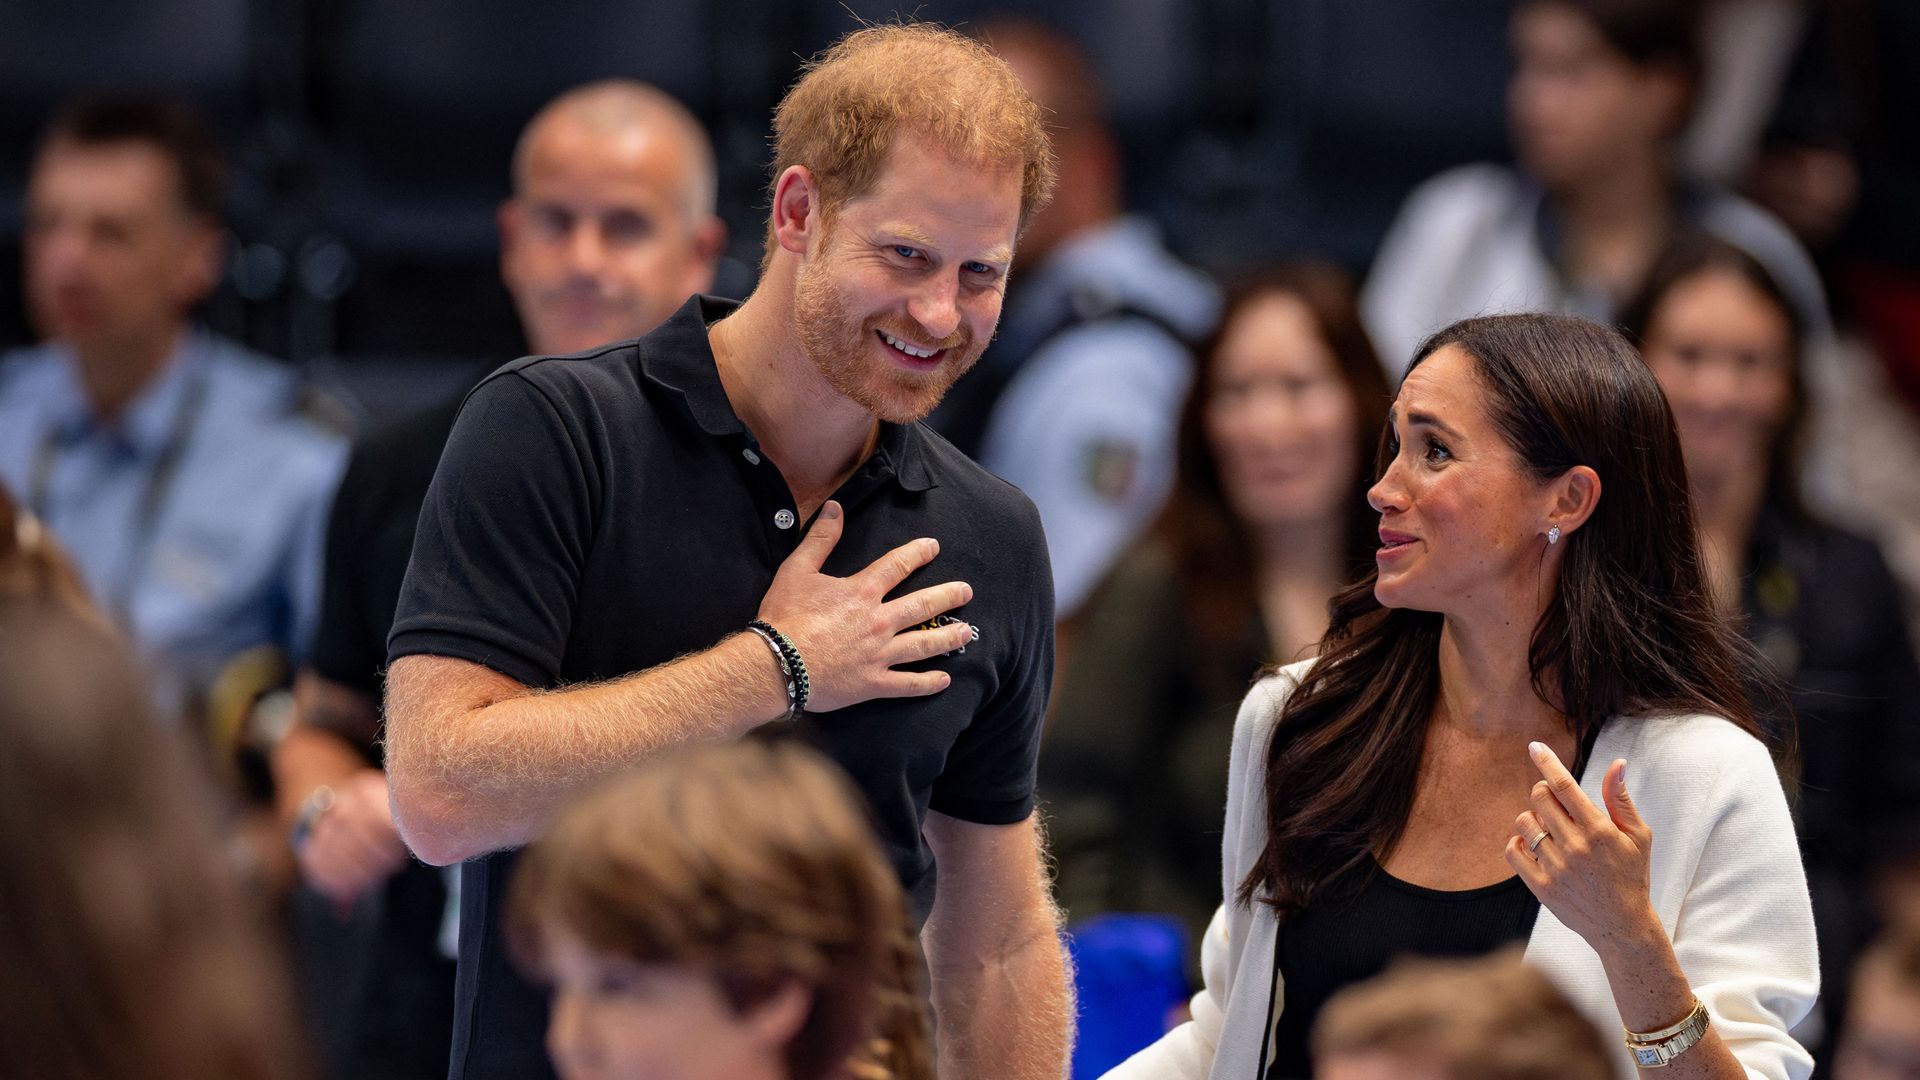 Meghan Markle's first day at the Invictus arena left me feeling emotional